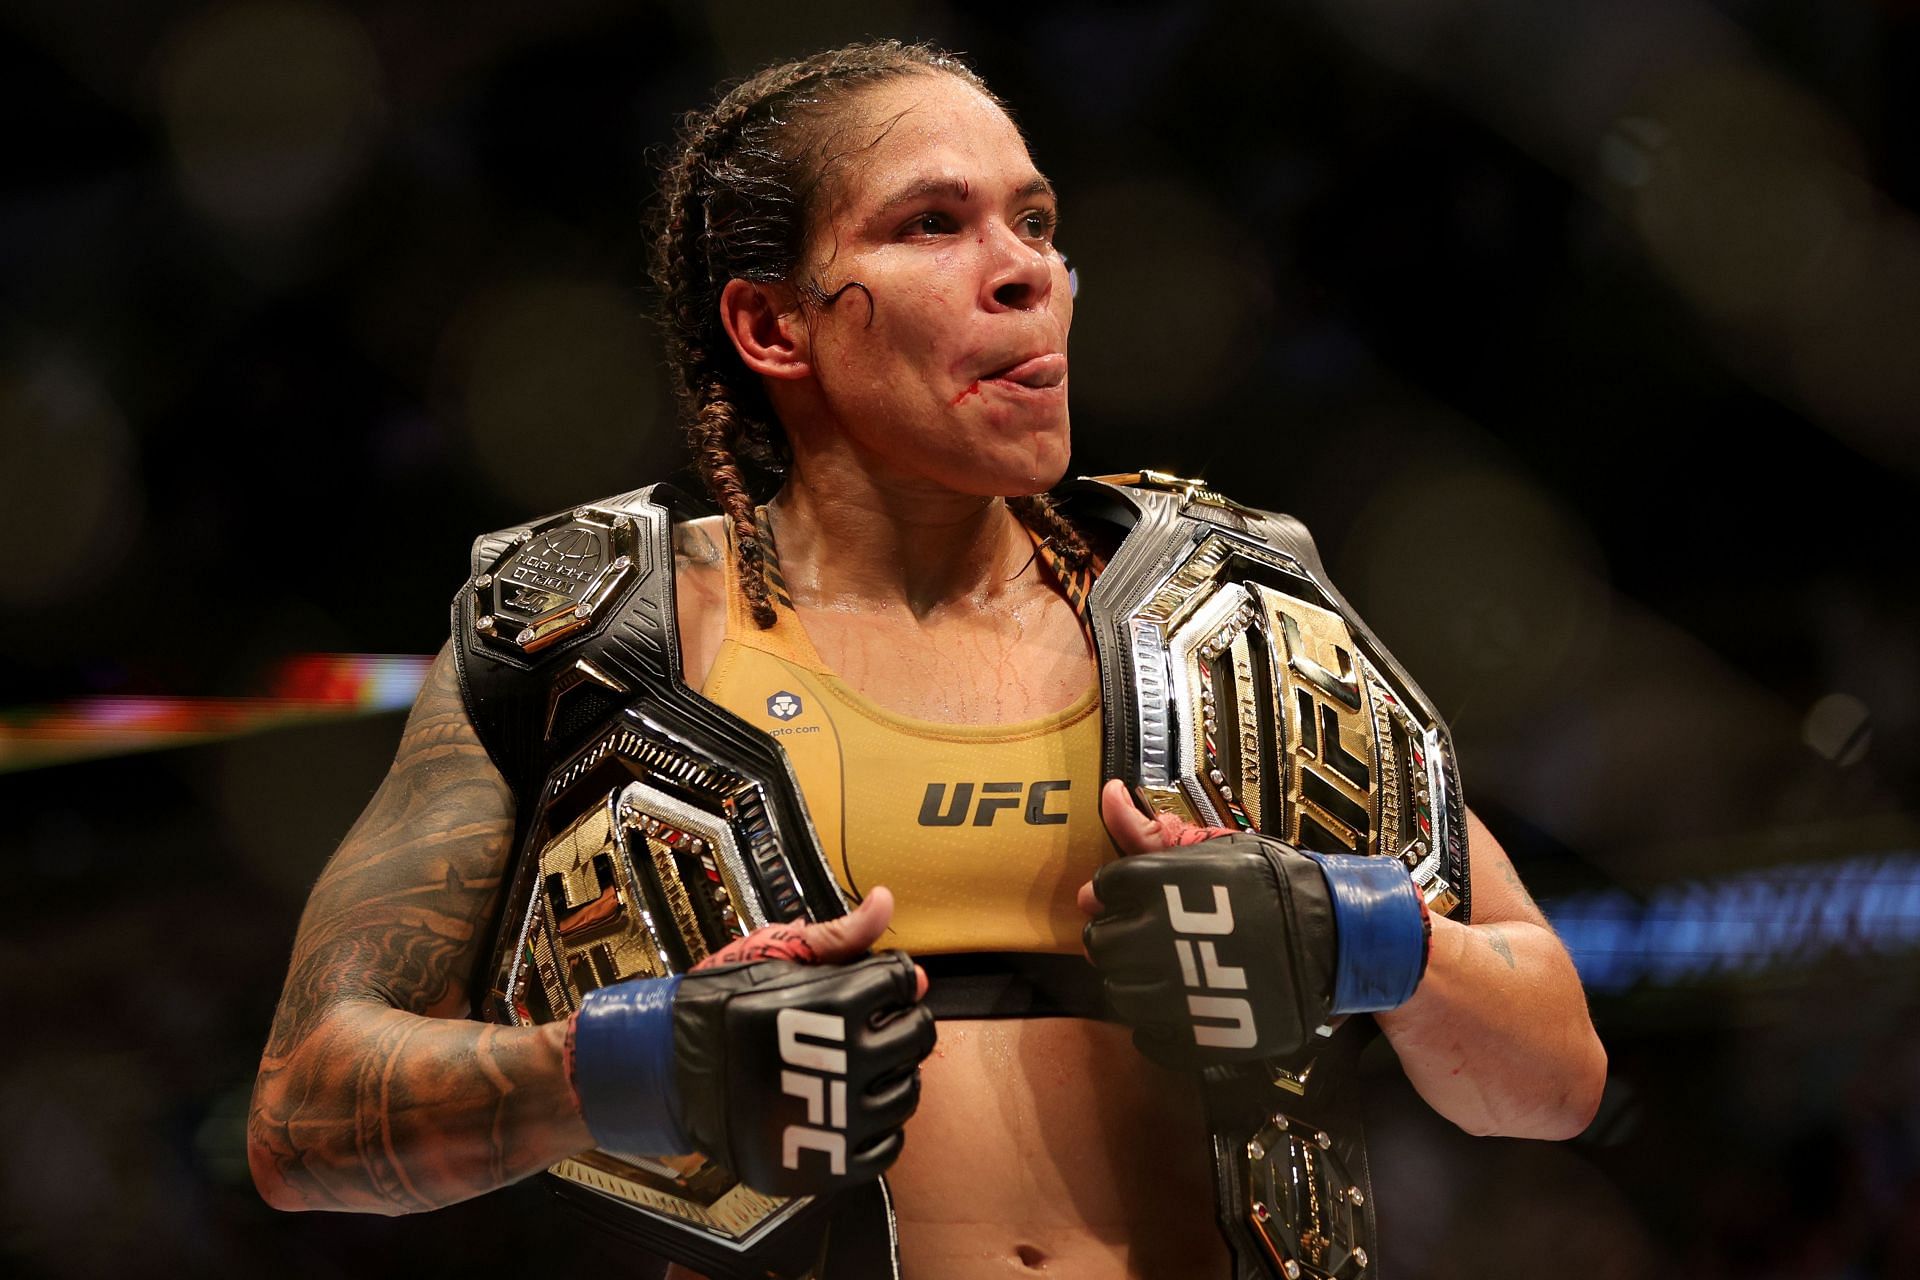 The legendary Amanda Nunes is back in action next month